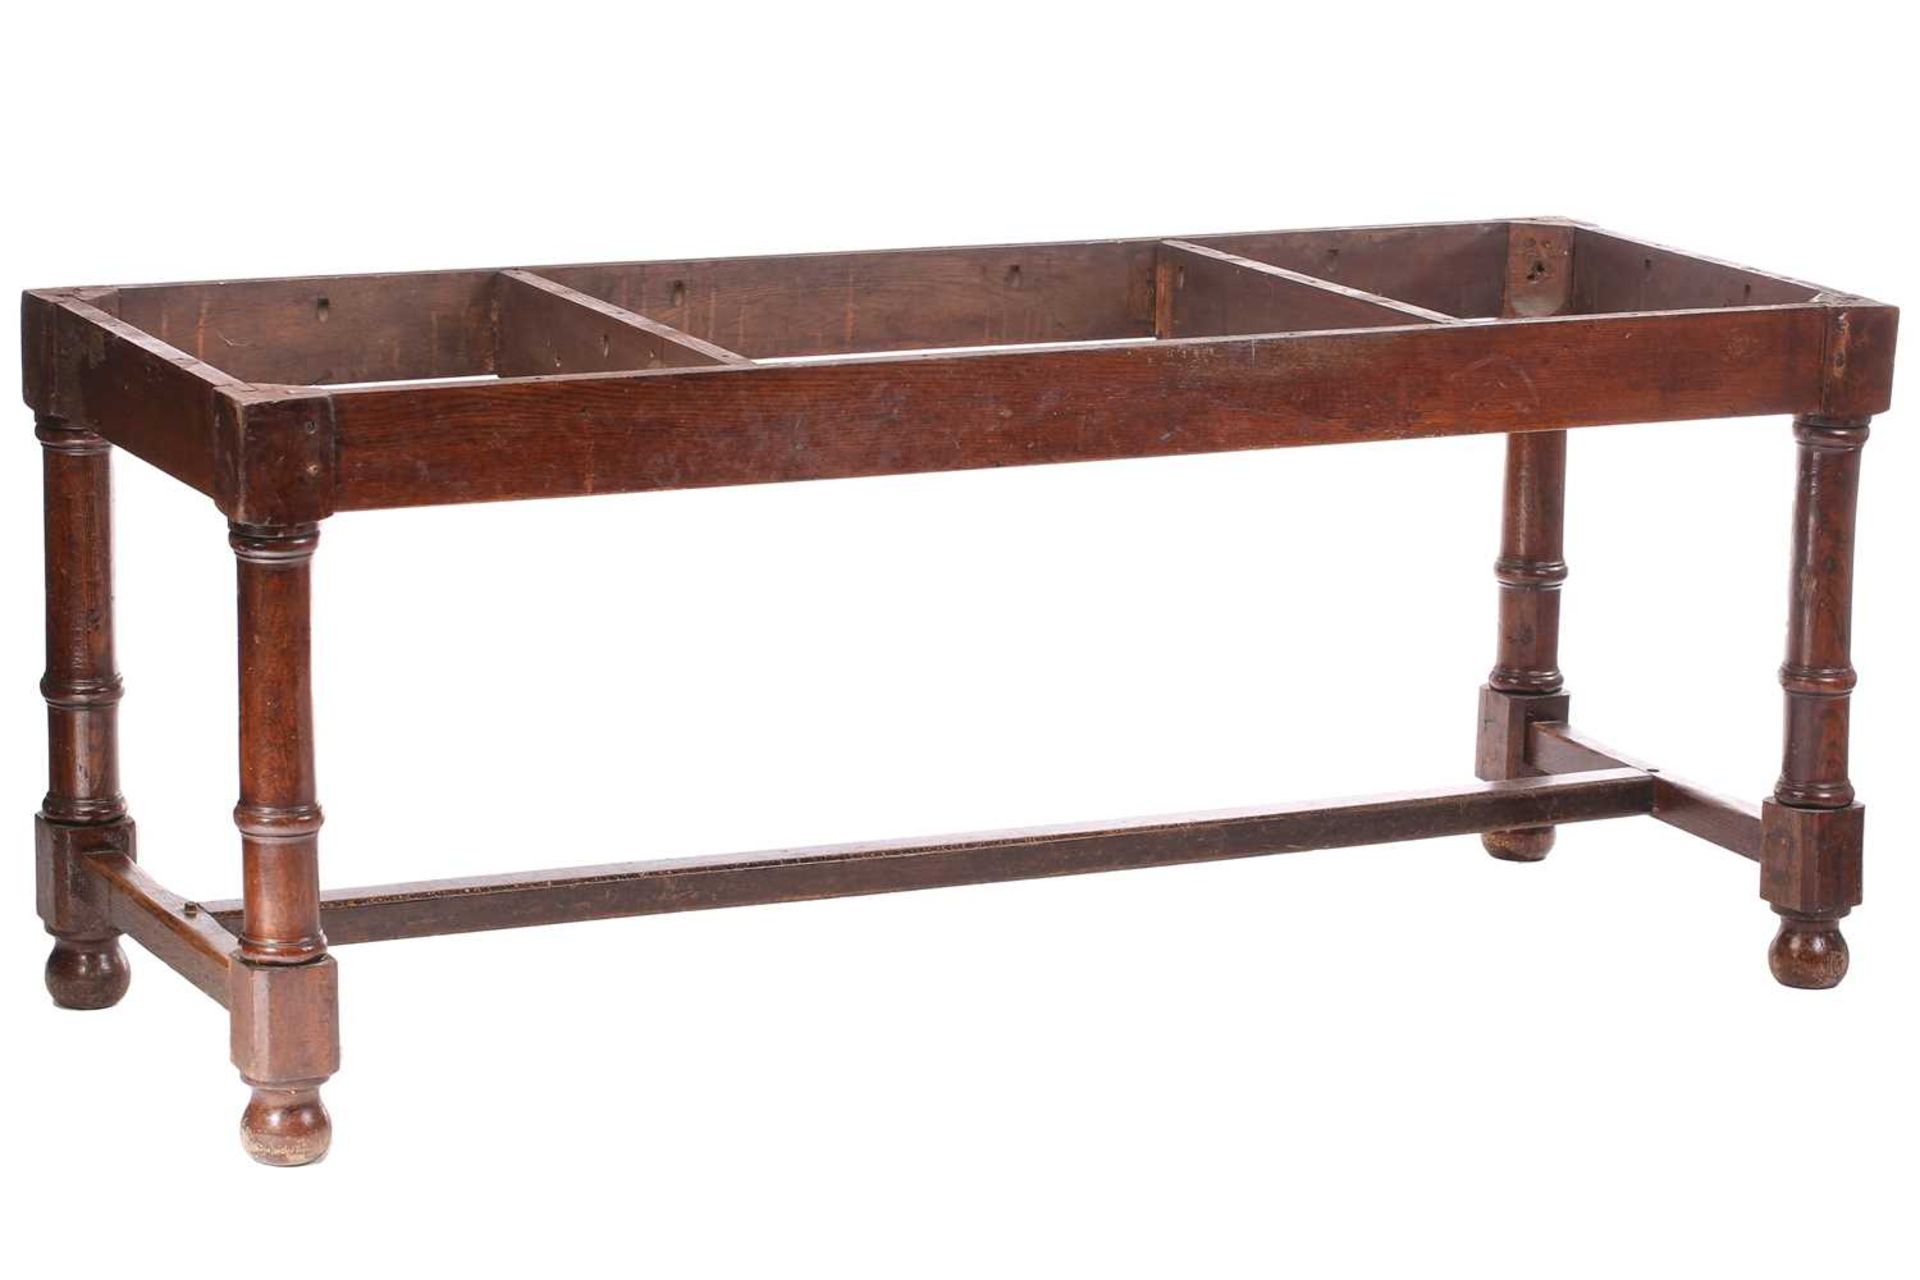 A French rustic oak farmhouse table, 19th century, with cleated scrubbed plank top, supported by - Image 2 of 8